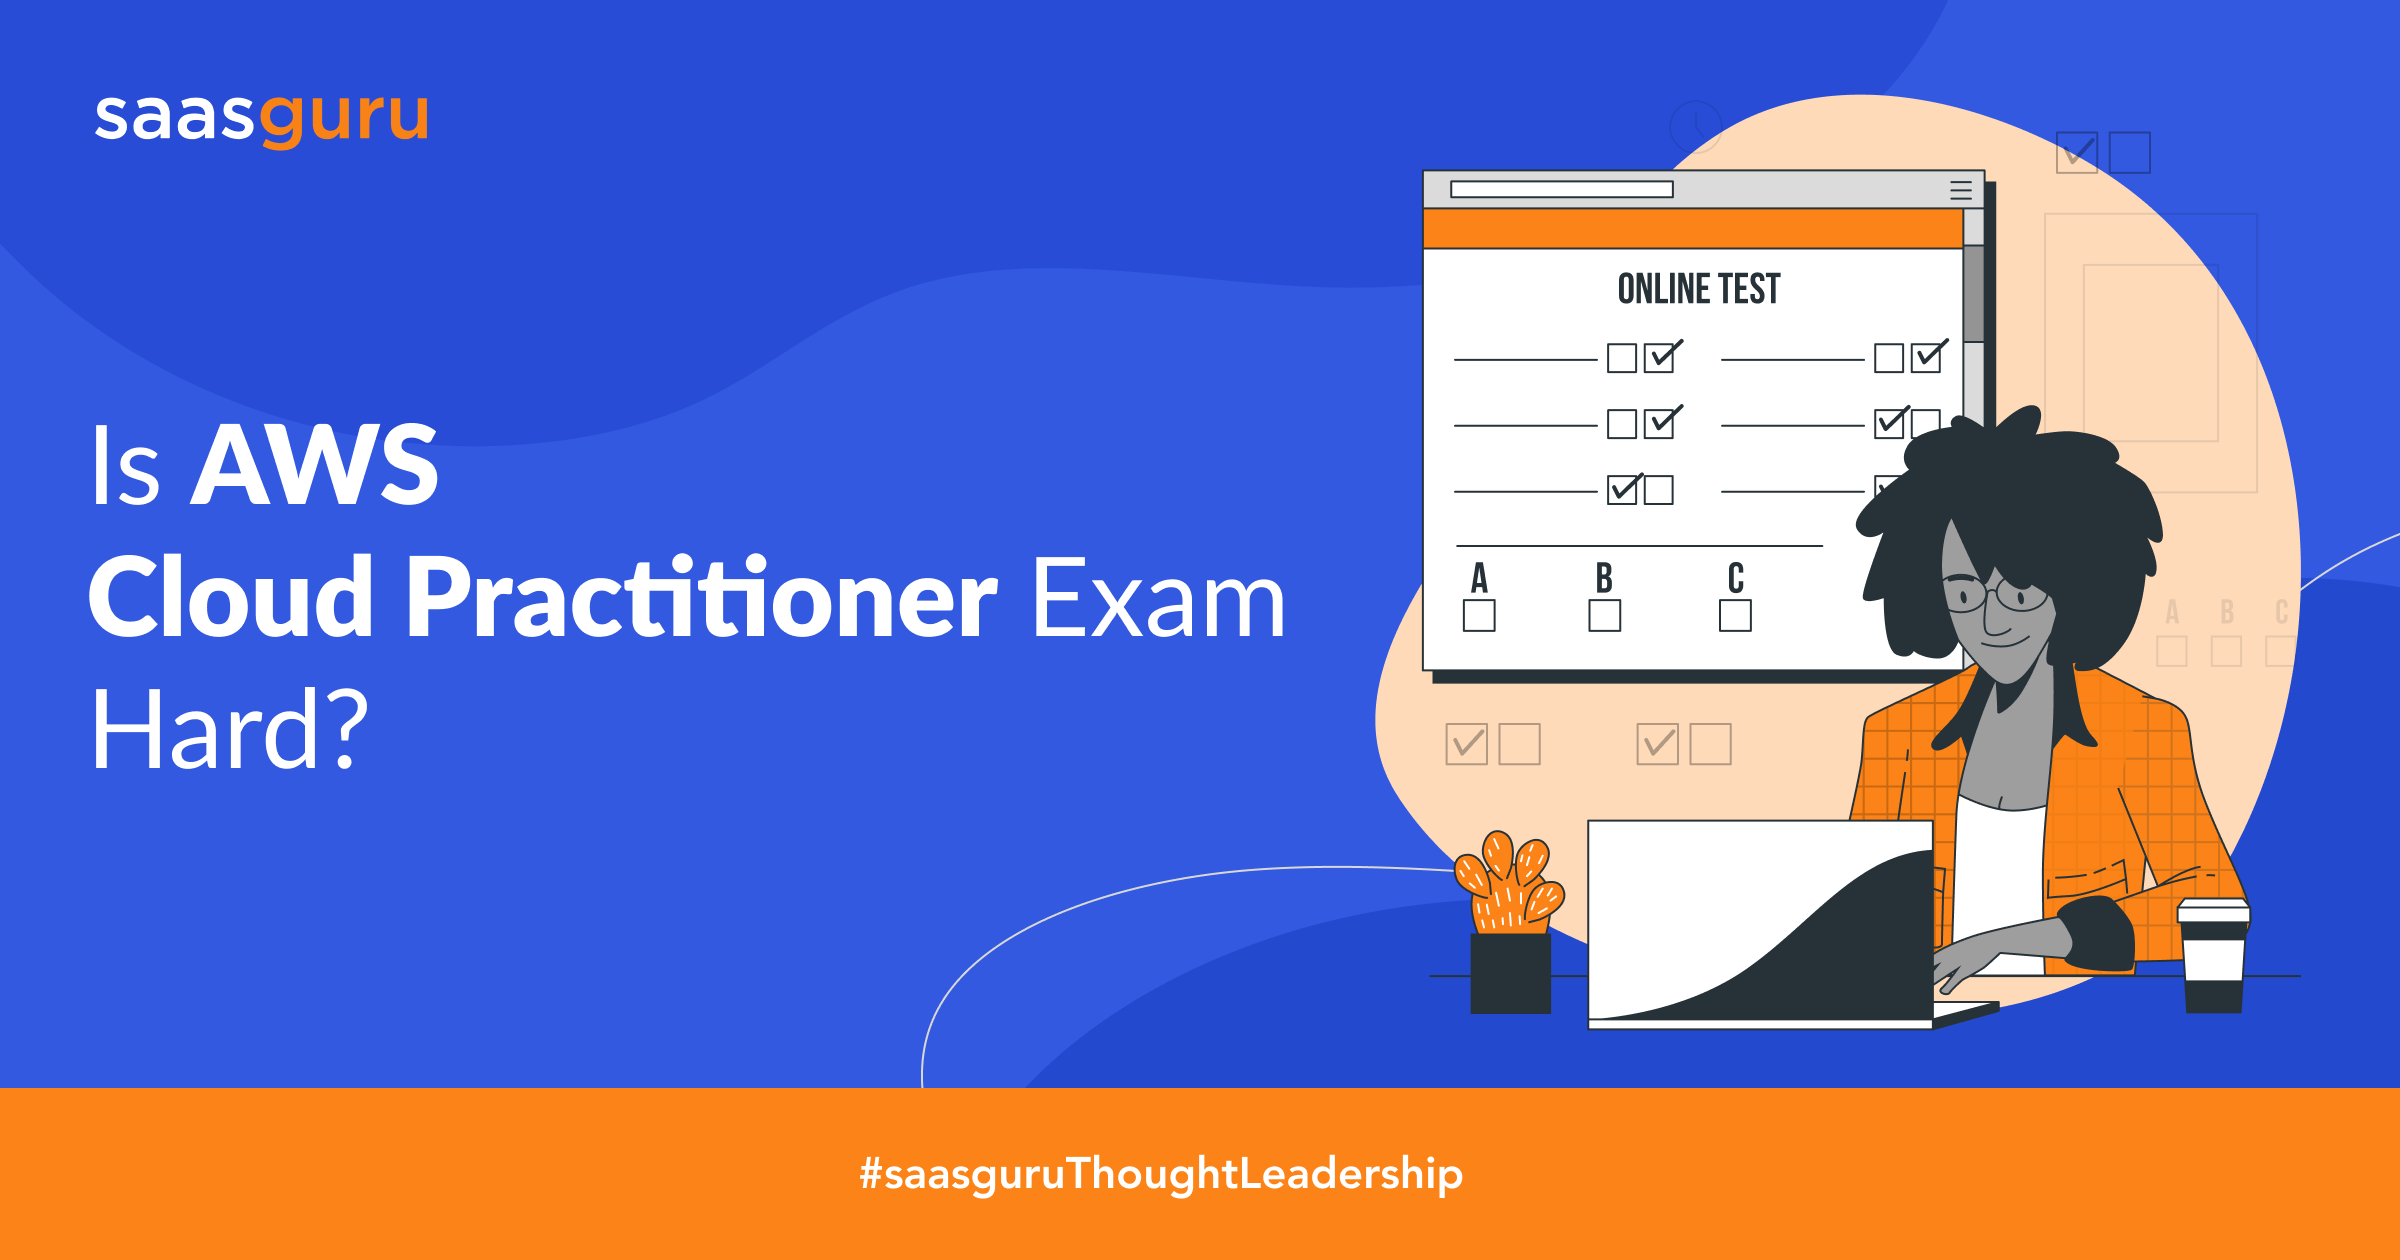 Is AWS Cloud Practitioner Exam Hard?